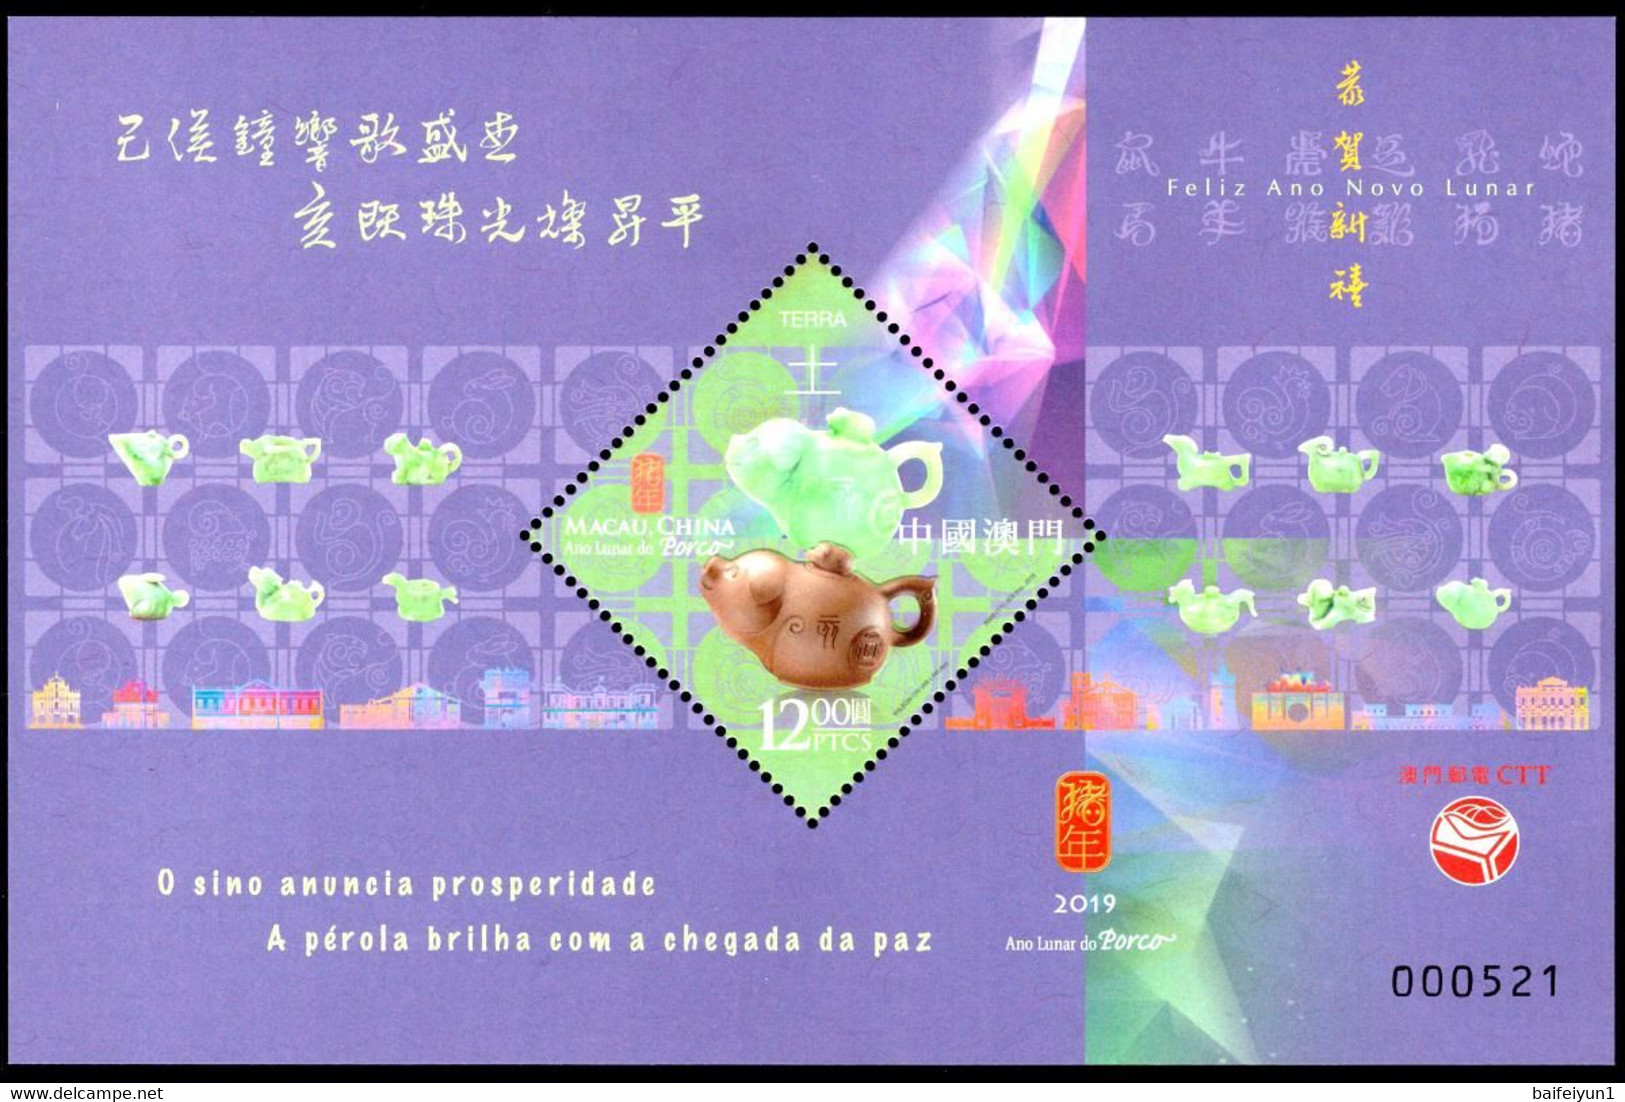 Macau 2019 China New Year Zodiac Of Pig Stamps 5v+ S/S Hologram - Hologramme